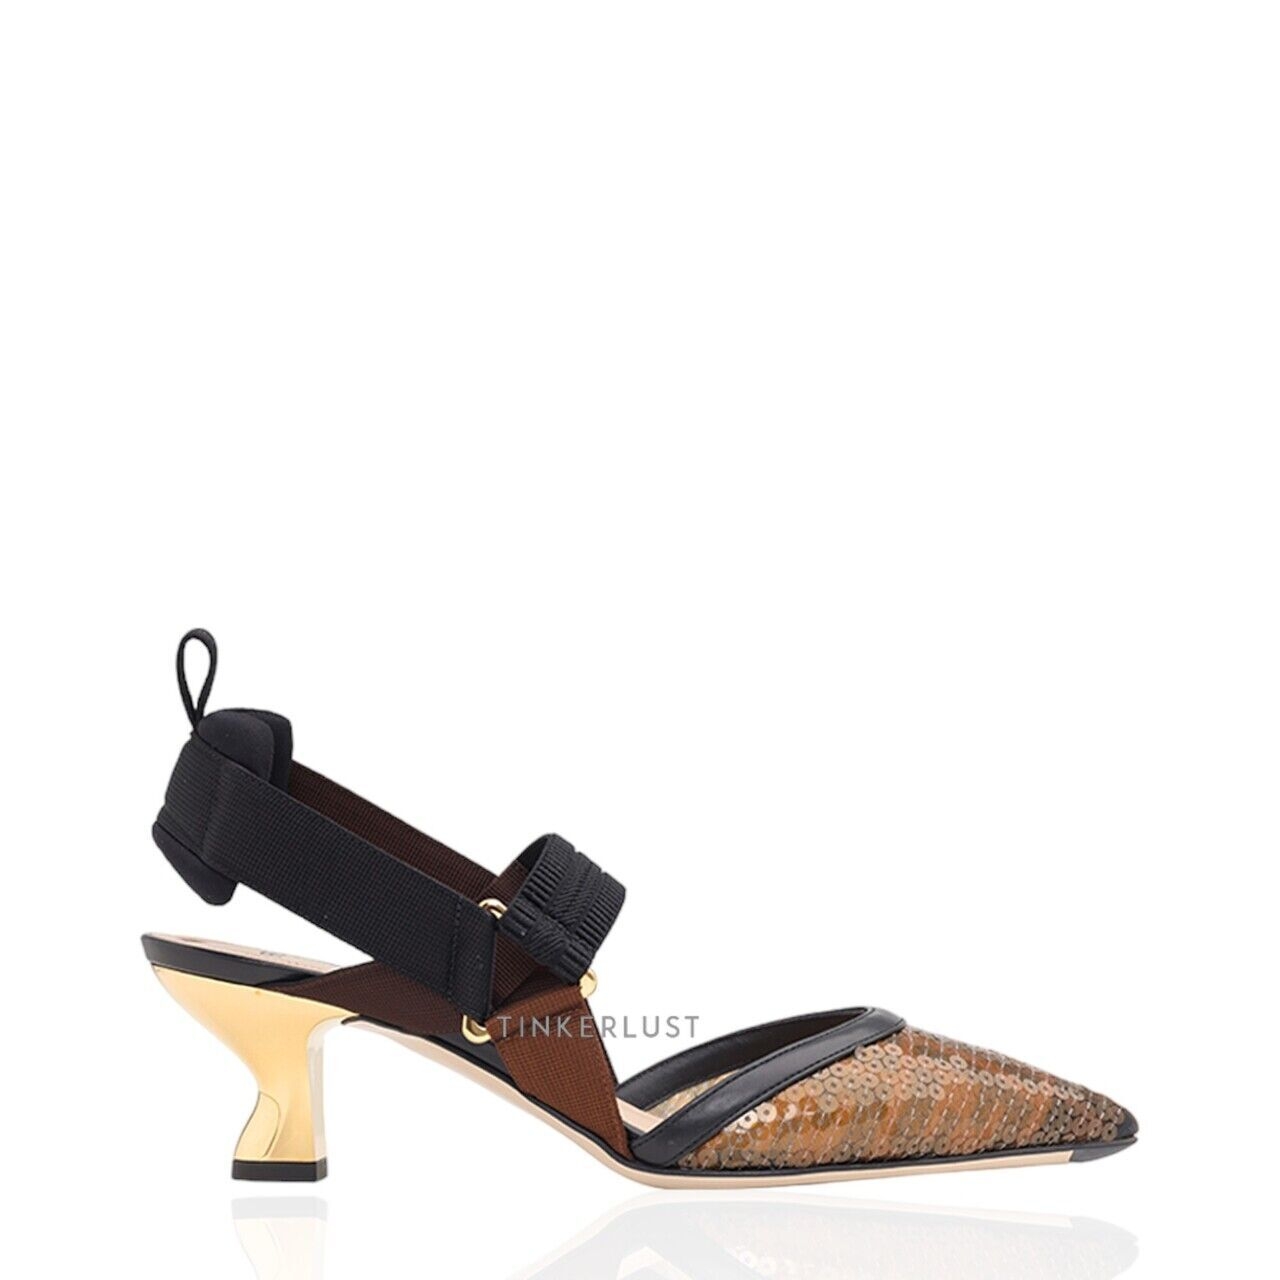 Fendi Colibri Slingback Pumps 55mm in Black/Amber Micromesh FF Motif with Sequin Embroidery Heels